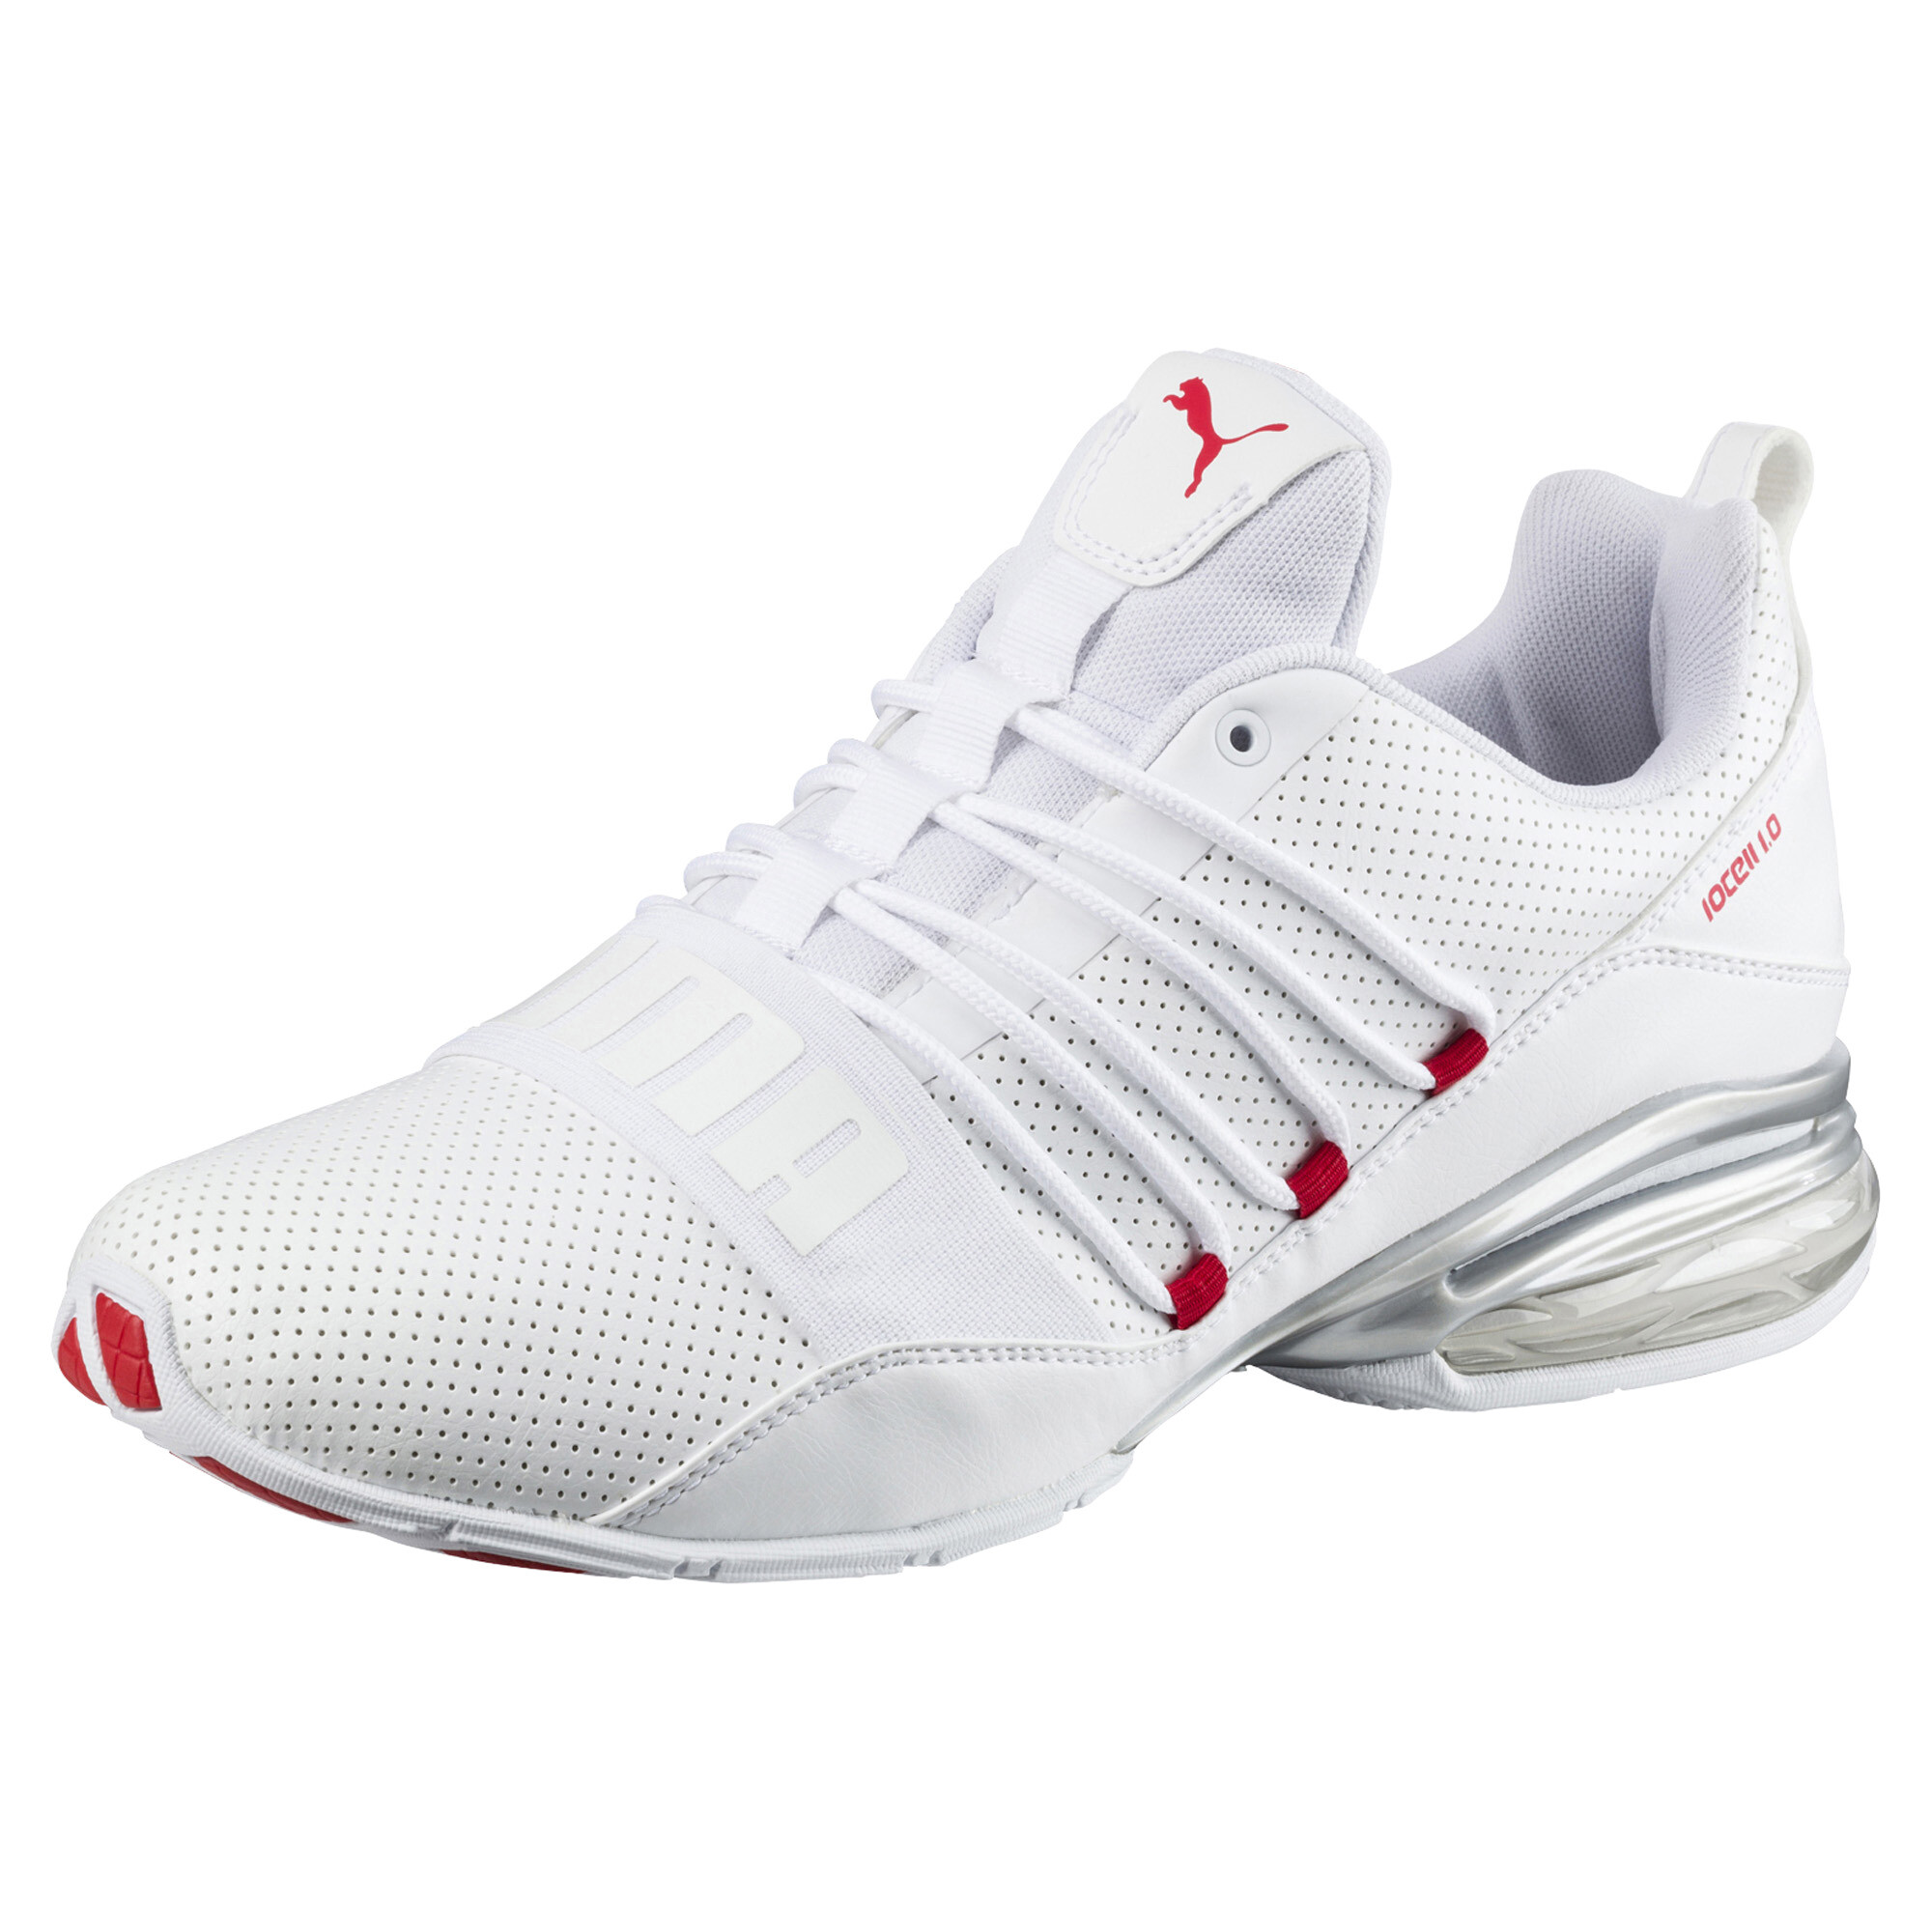 puma 10cell running shoes